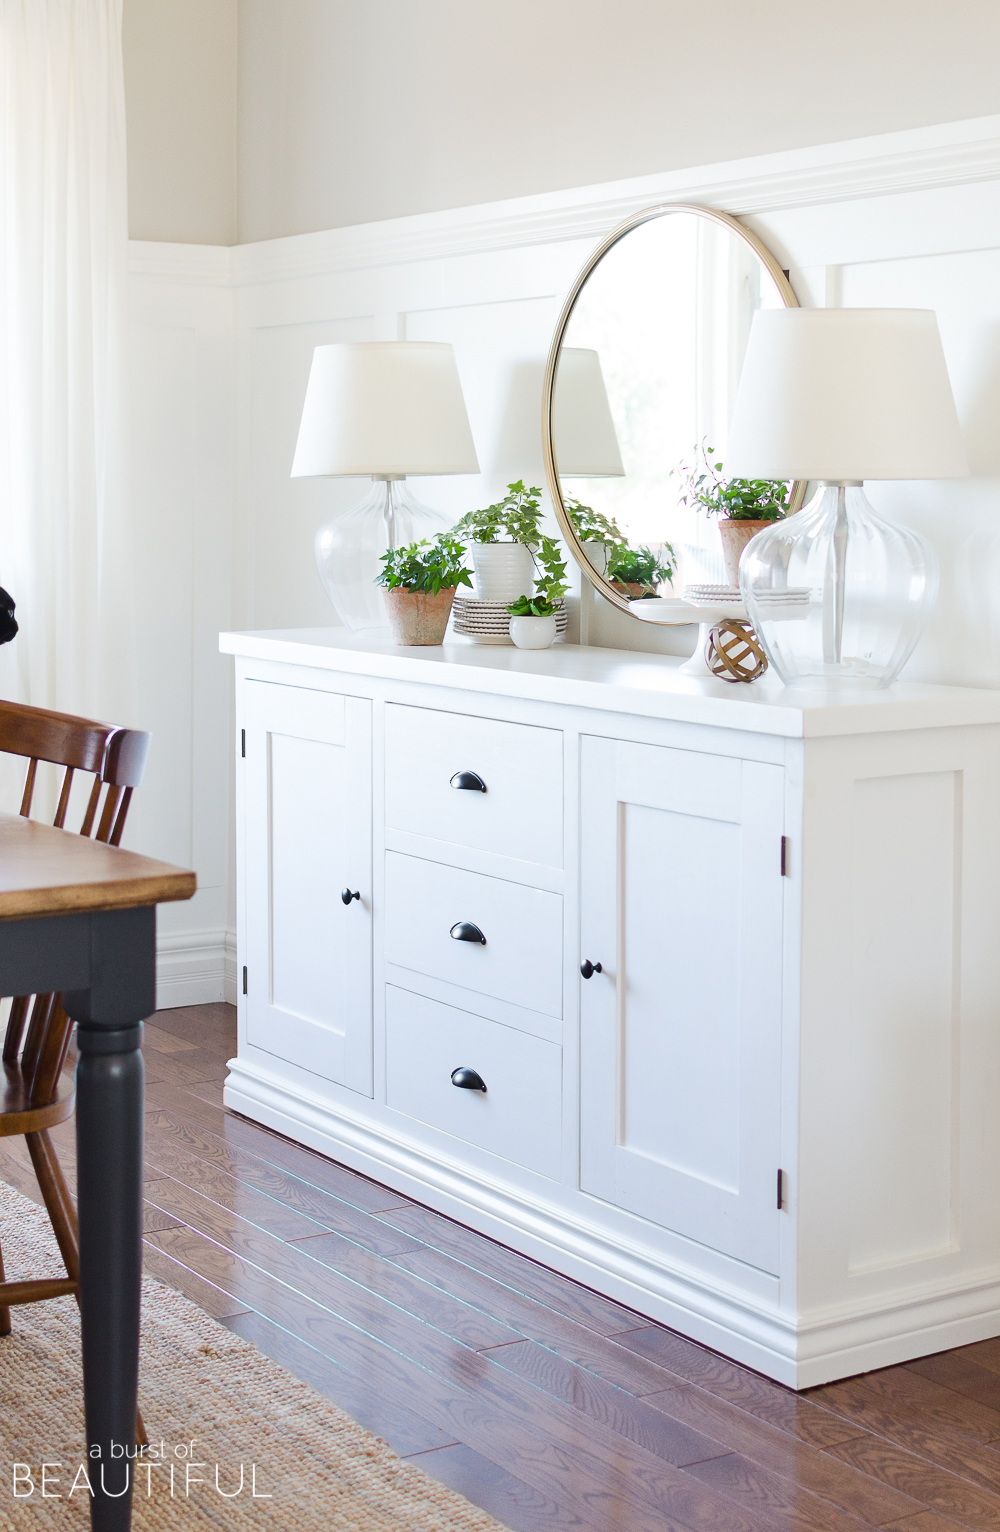 25+ bloggers share their simple spring mantle and vignette decorating ideas